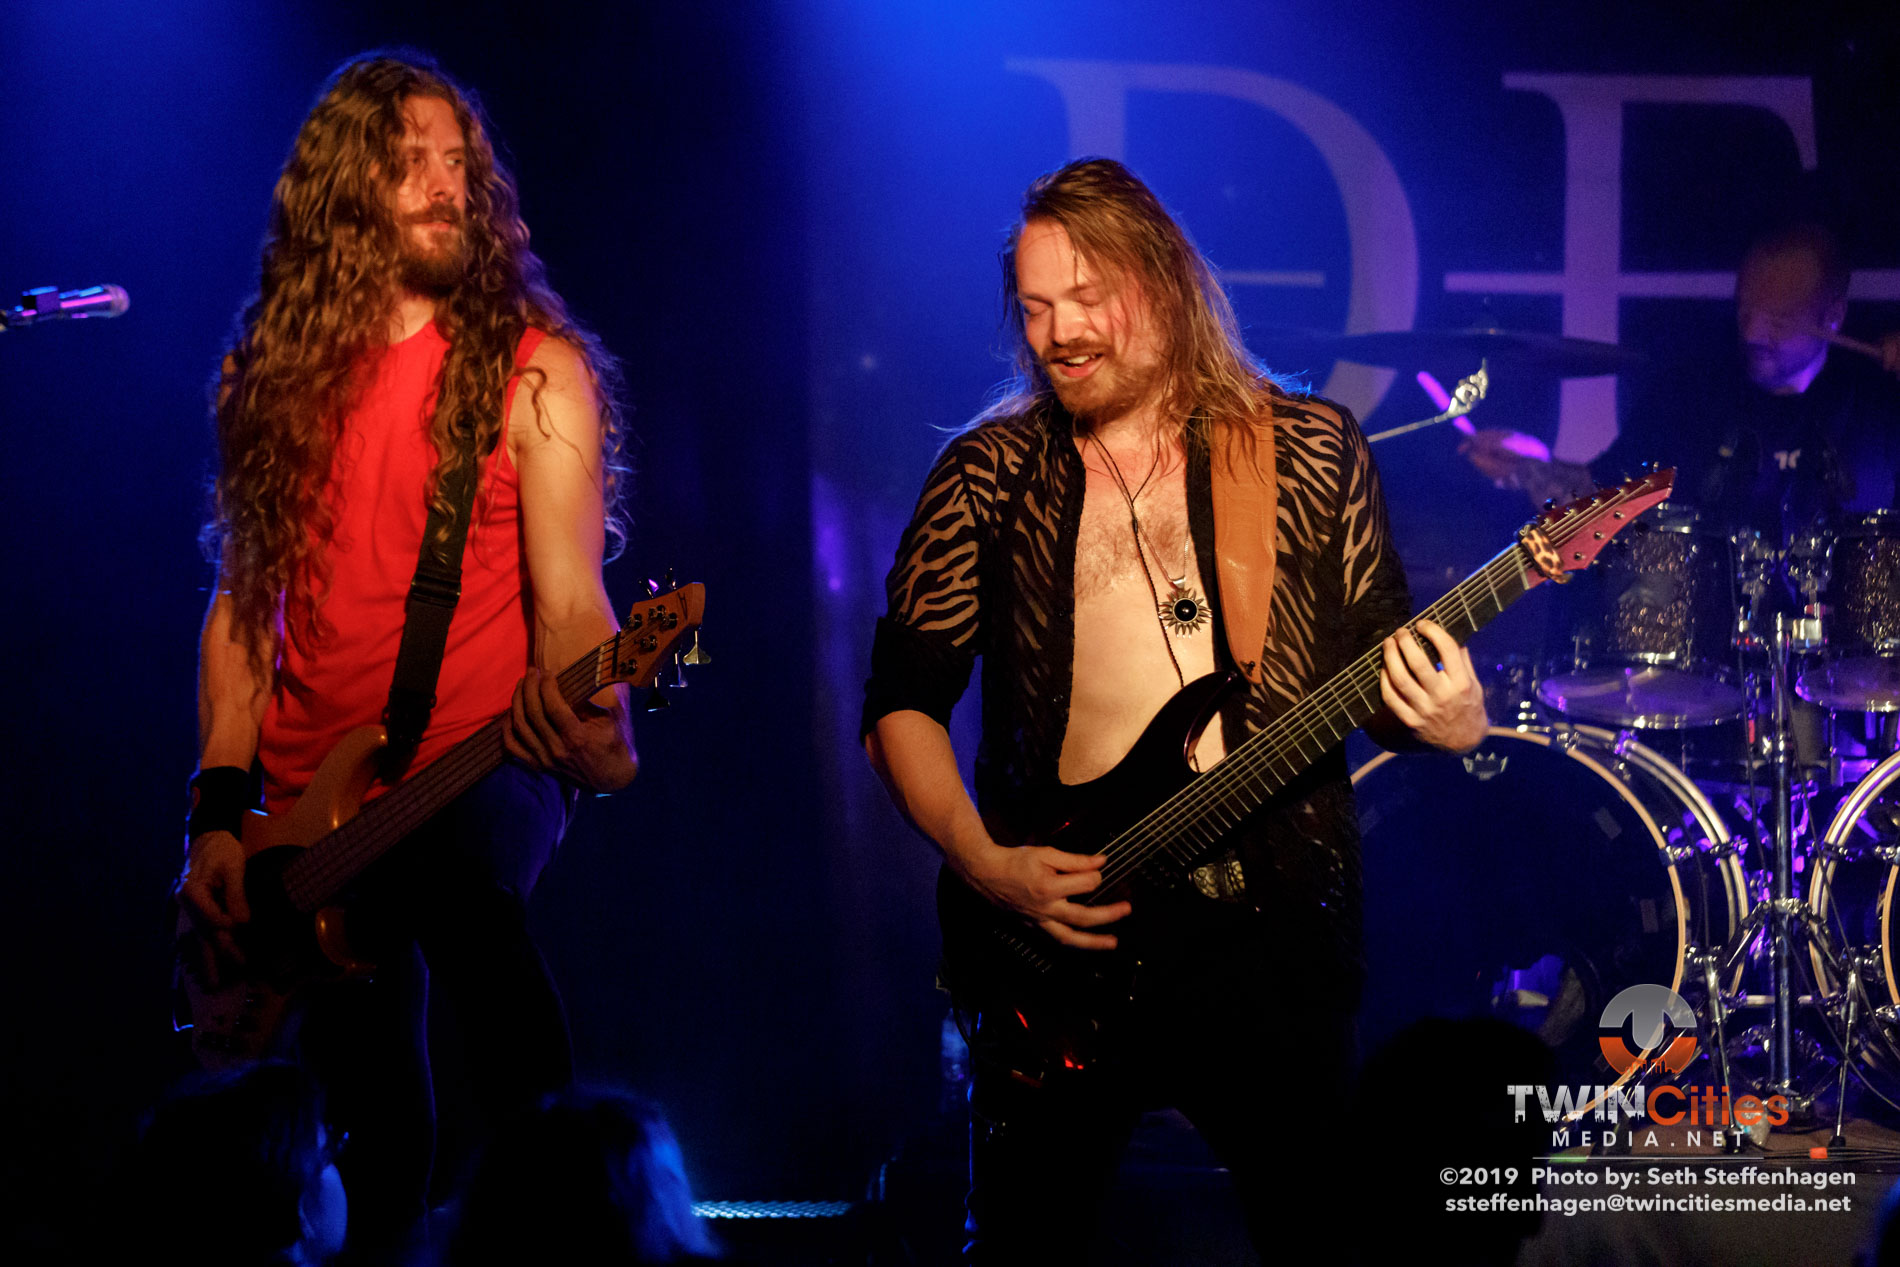 September 30, 2019 - Minneapolis, Minnesota, United States - Delain live in concert at The Cabooze along with Amorphis and Anneke Van Giersbergen as the openers.

(Photo by Seth Steffenhagen/Steffenhagen Photography)